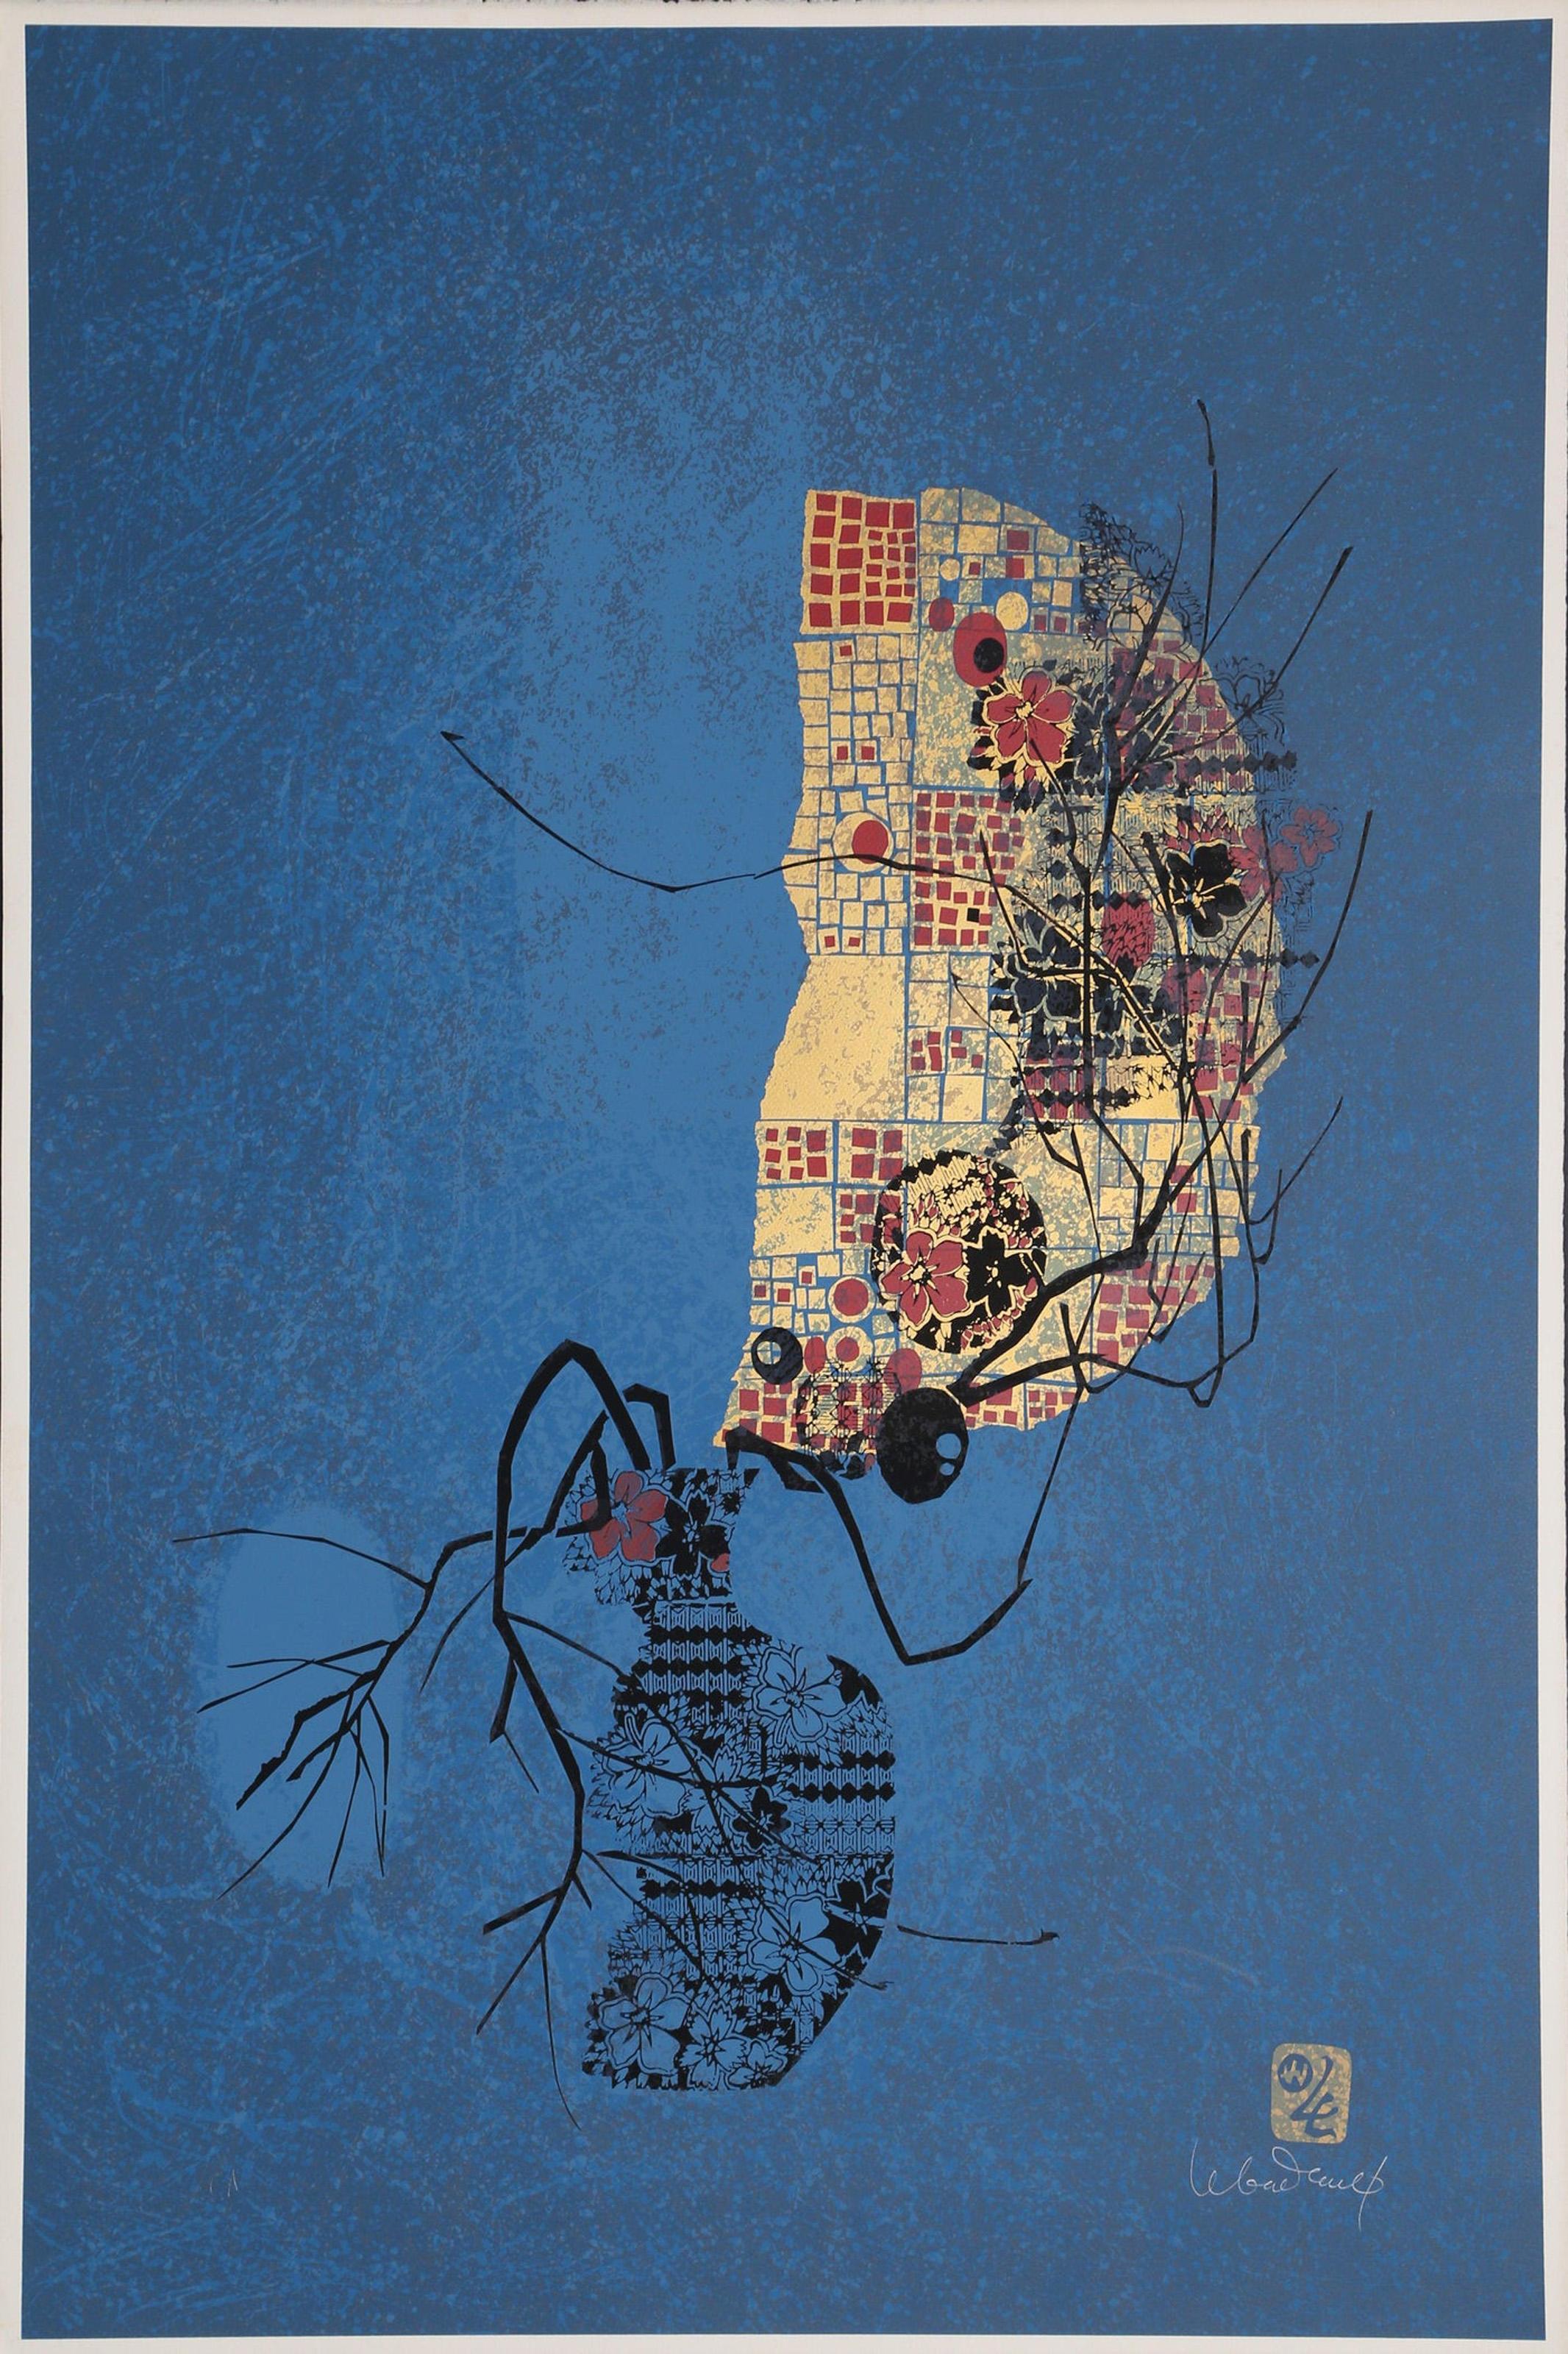 Lebadang (aka Hoi), Vietnamese (1922 - 2015) -  Vase on Blue. Year: 1988-1989, Medium: Screenprint, signed and numbered in pencil, Edition: 203/275, Size: 45.5 x 30 in. (115.57 x 76.2 cm), Frame Size: 59 x 43 inches, Description: Lebadang was a